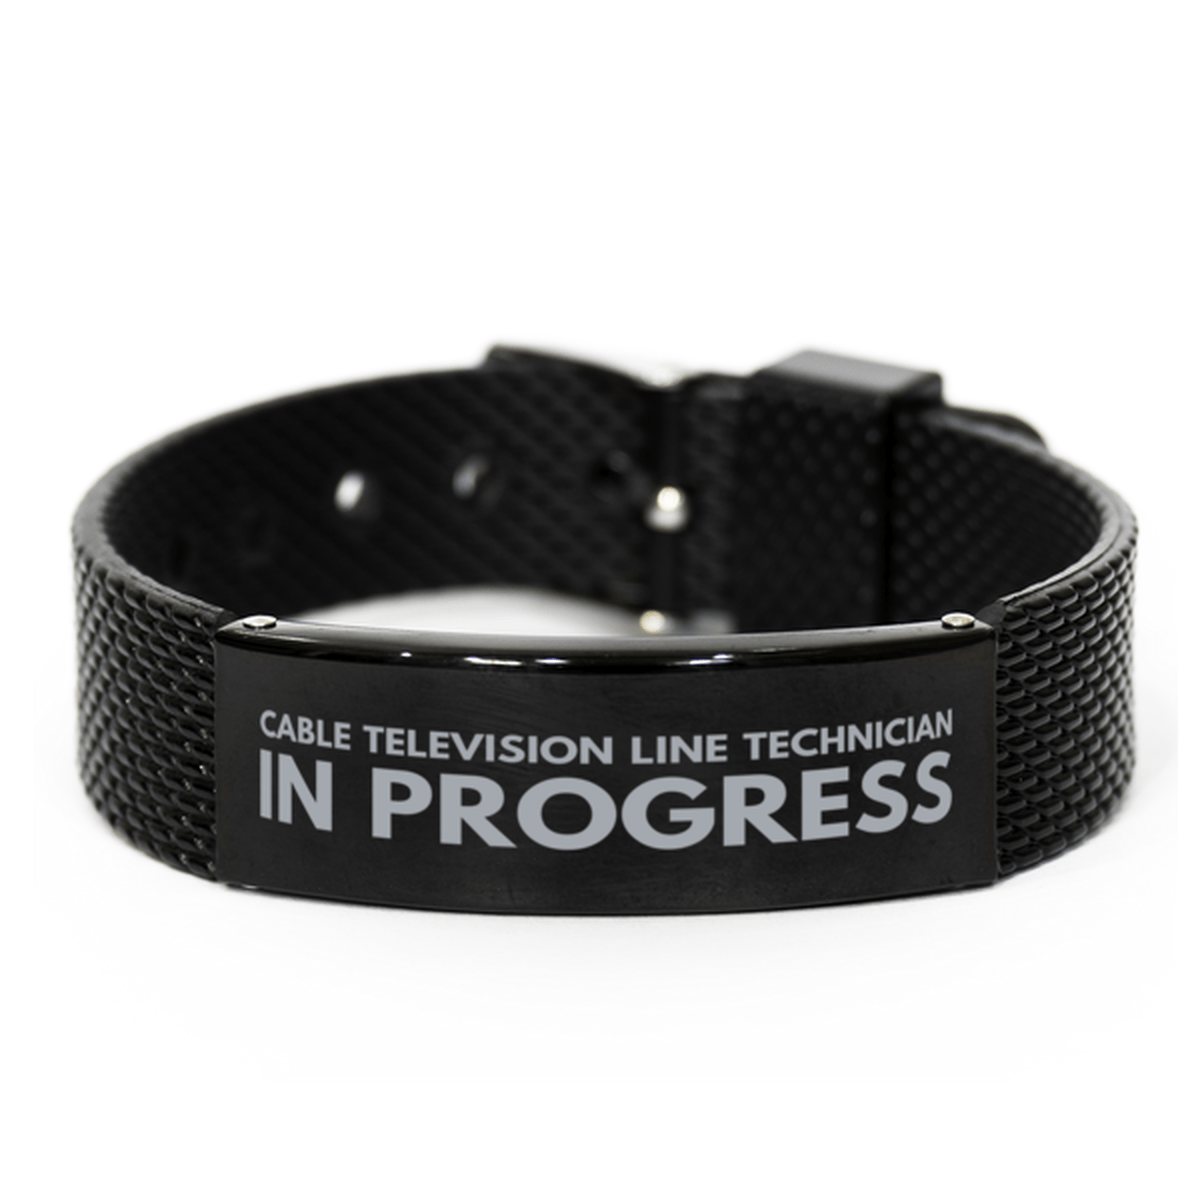 Inspirational Cable Television Line Technician Black Shark Mesh Bracelet, Cable Television Line Technician In Progress, Best Graduation Gifts for Students